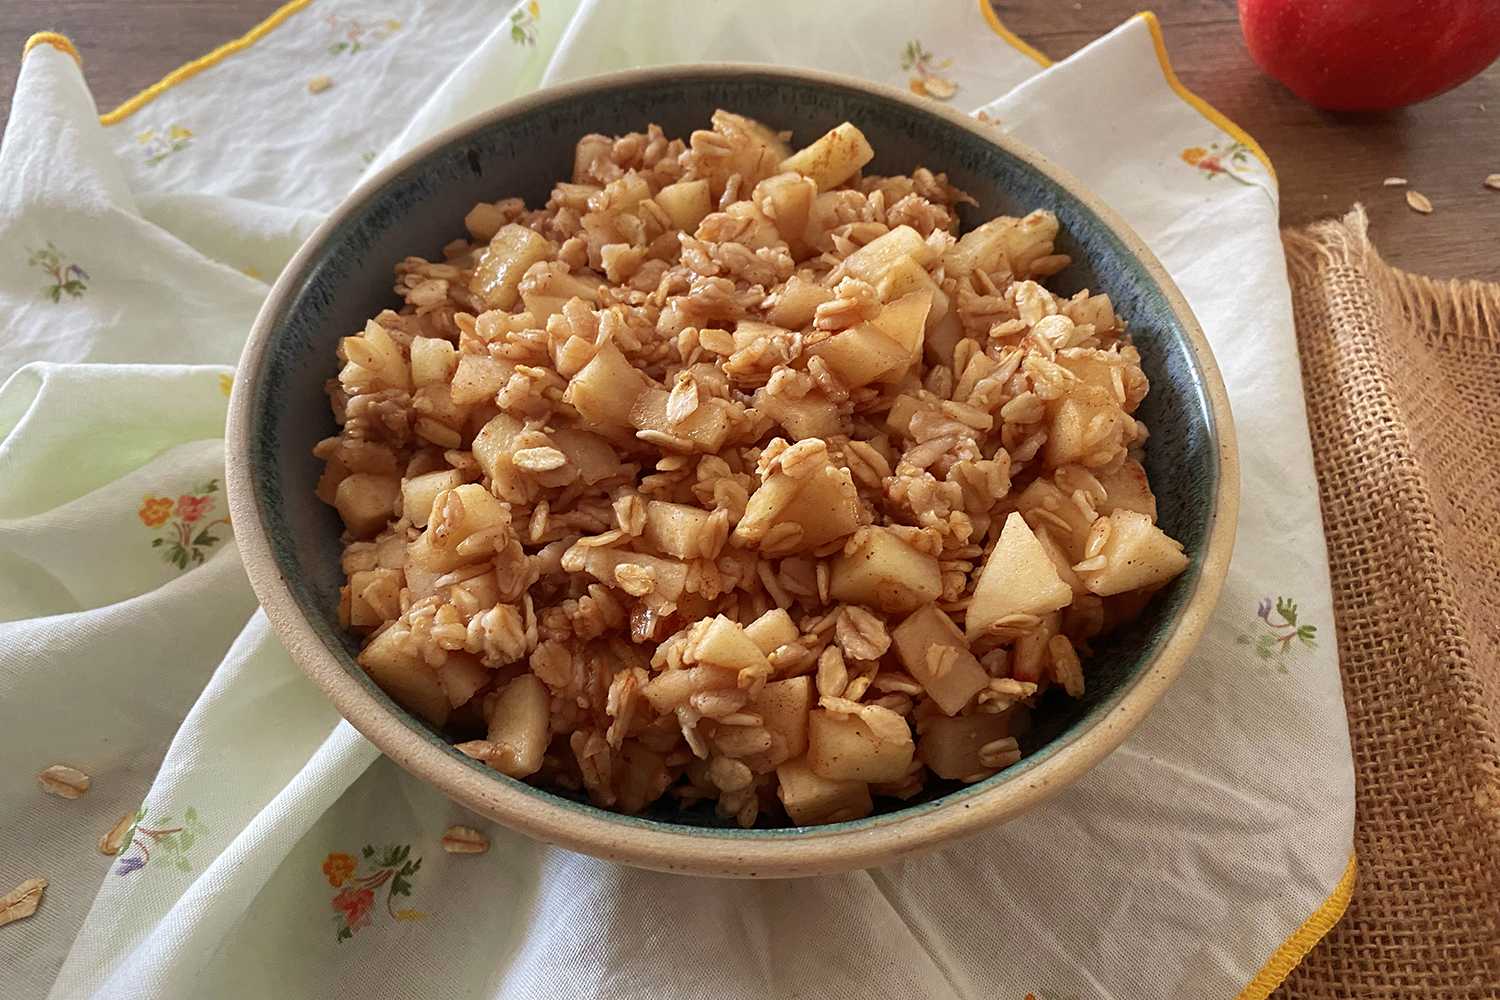 apple cubes combined oat and cinnamon inside a bowl